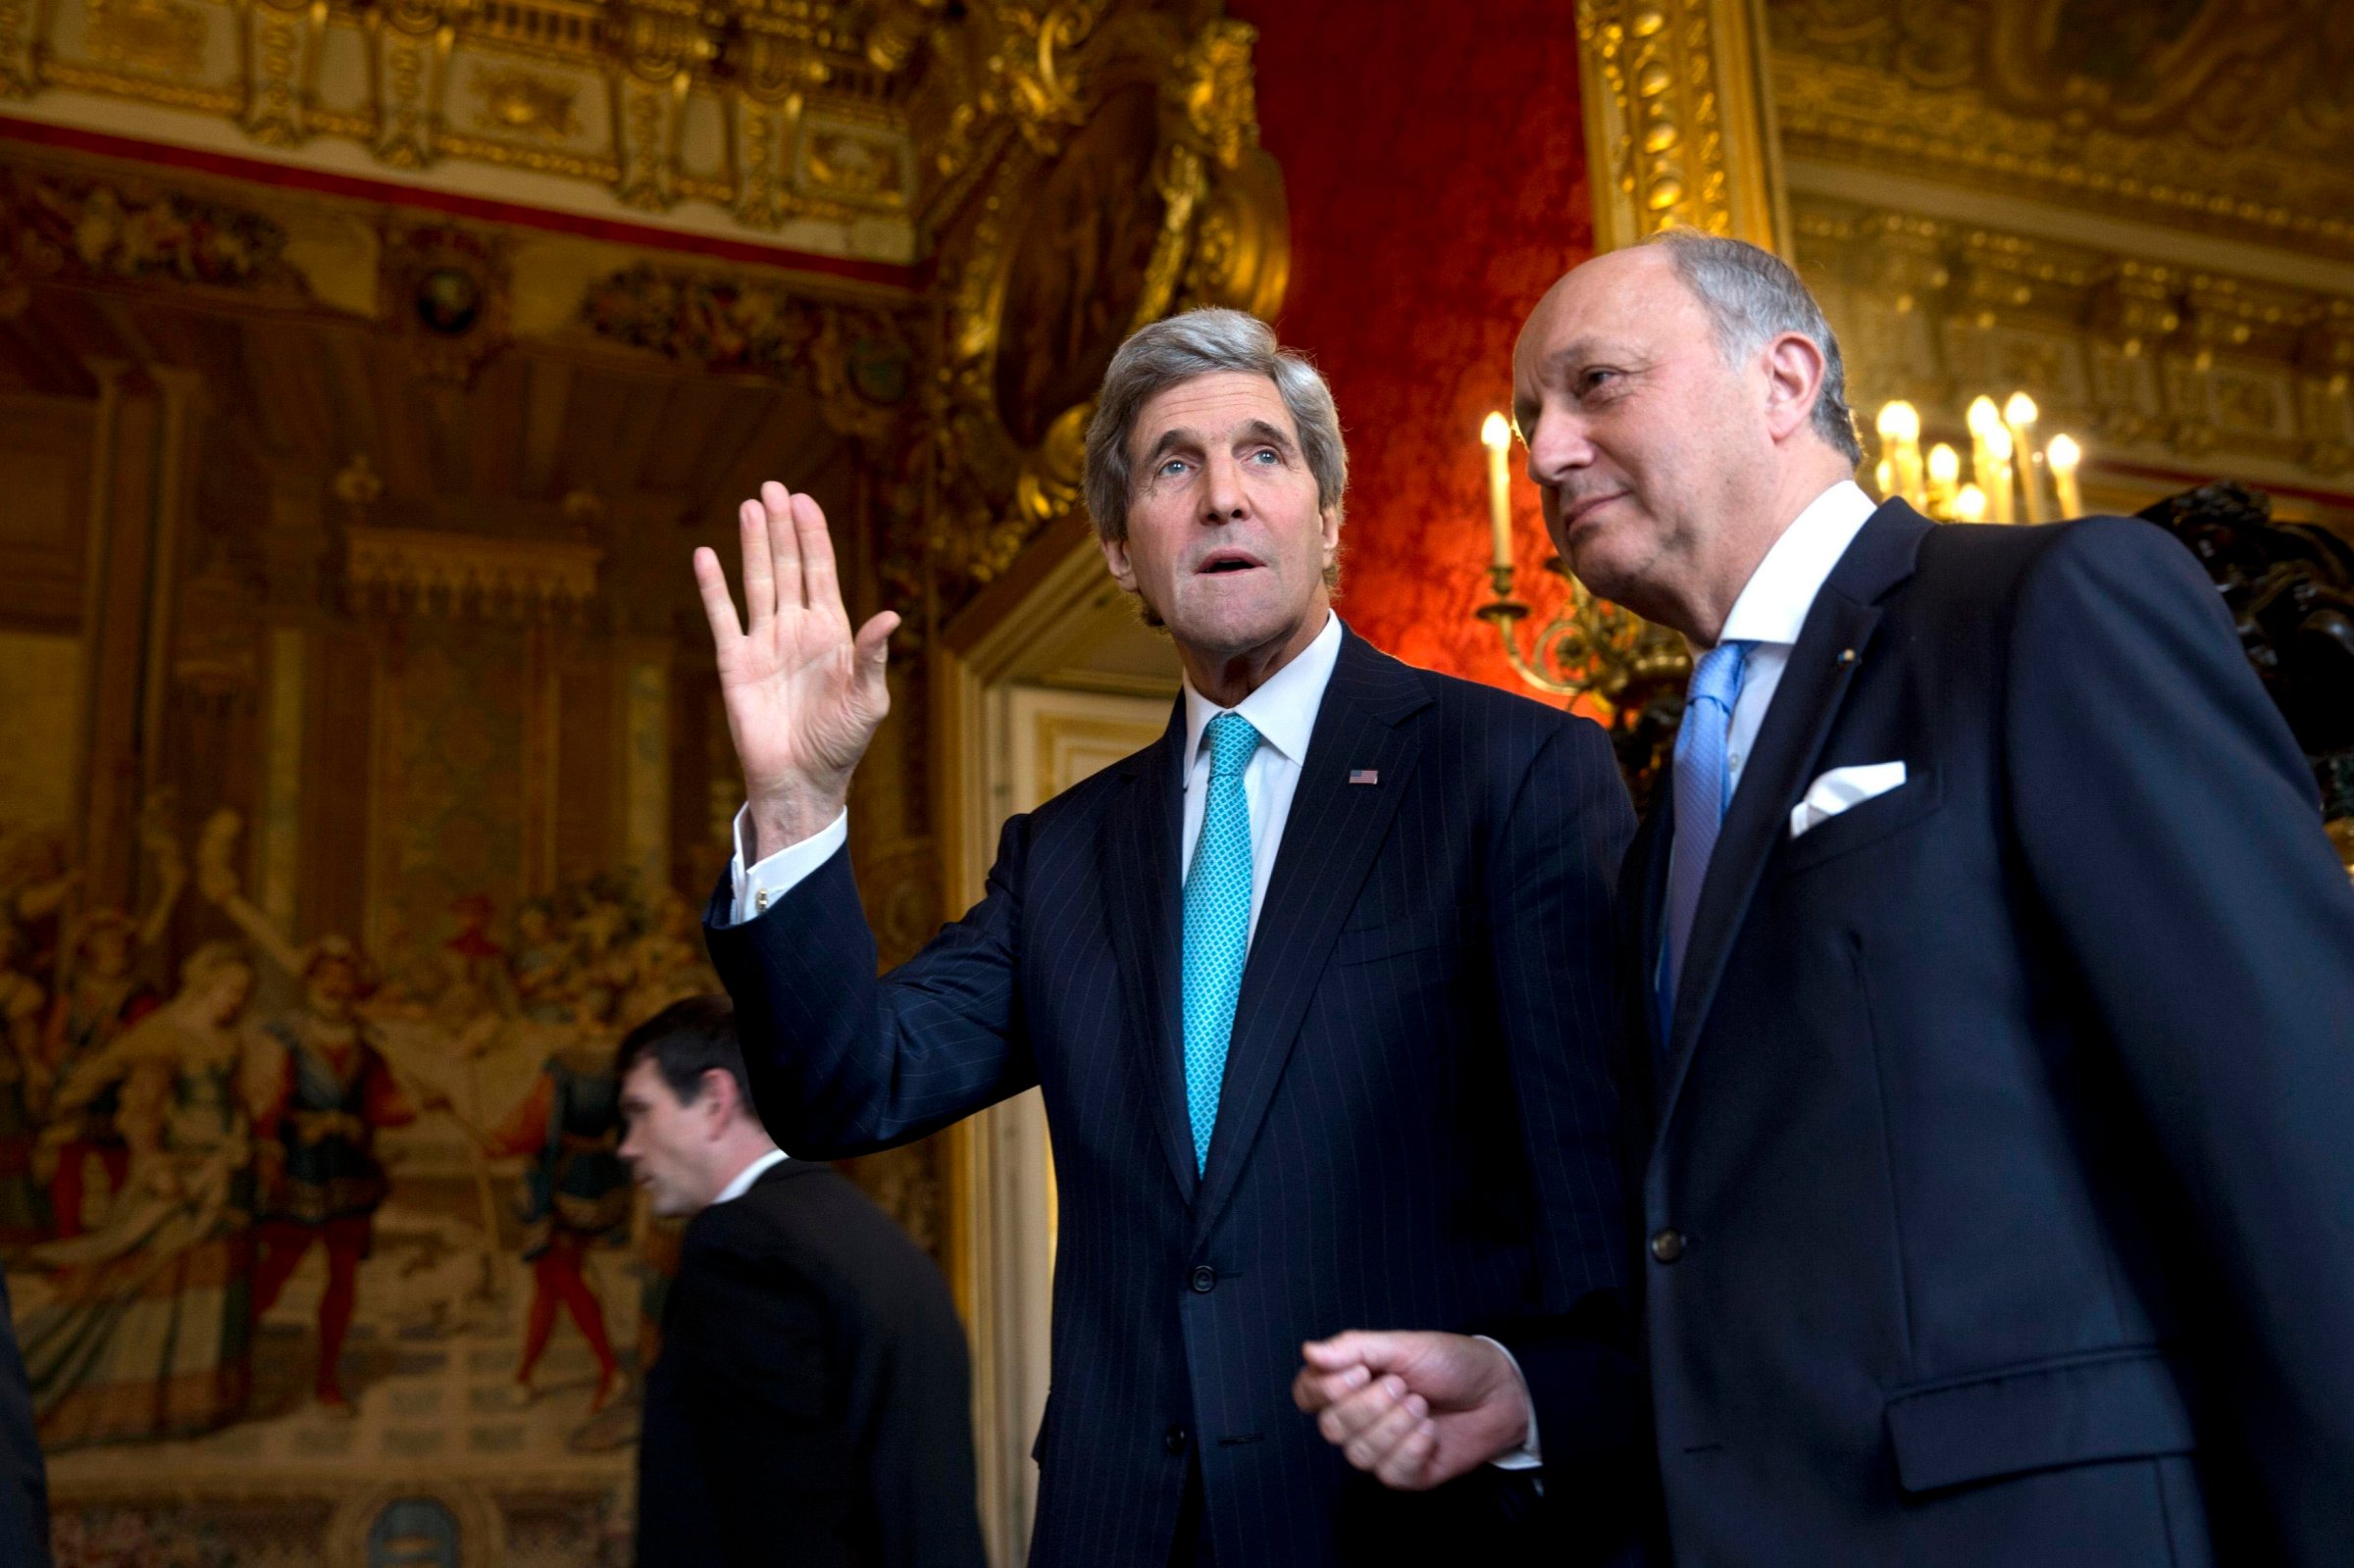 From left: U.S. Secretary of State John Kerry waves to the waiting media as he walks with French Foreign Minister Laurent Fabius for their meeting at the Quai d'Orsay in Paris, on March 30, 2014.